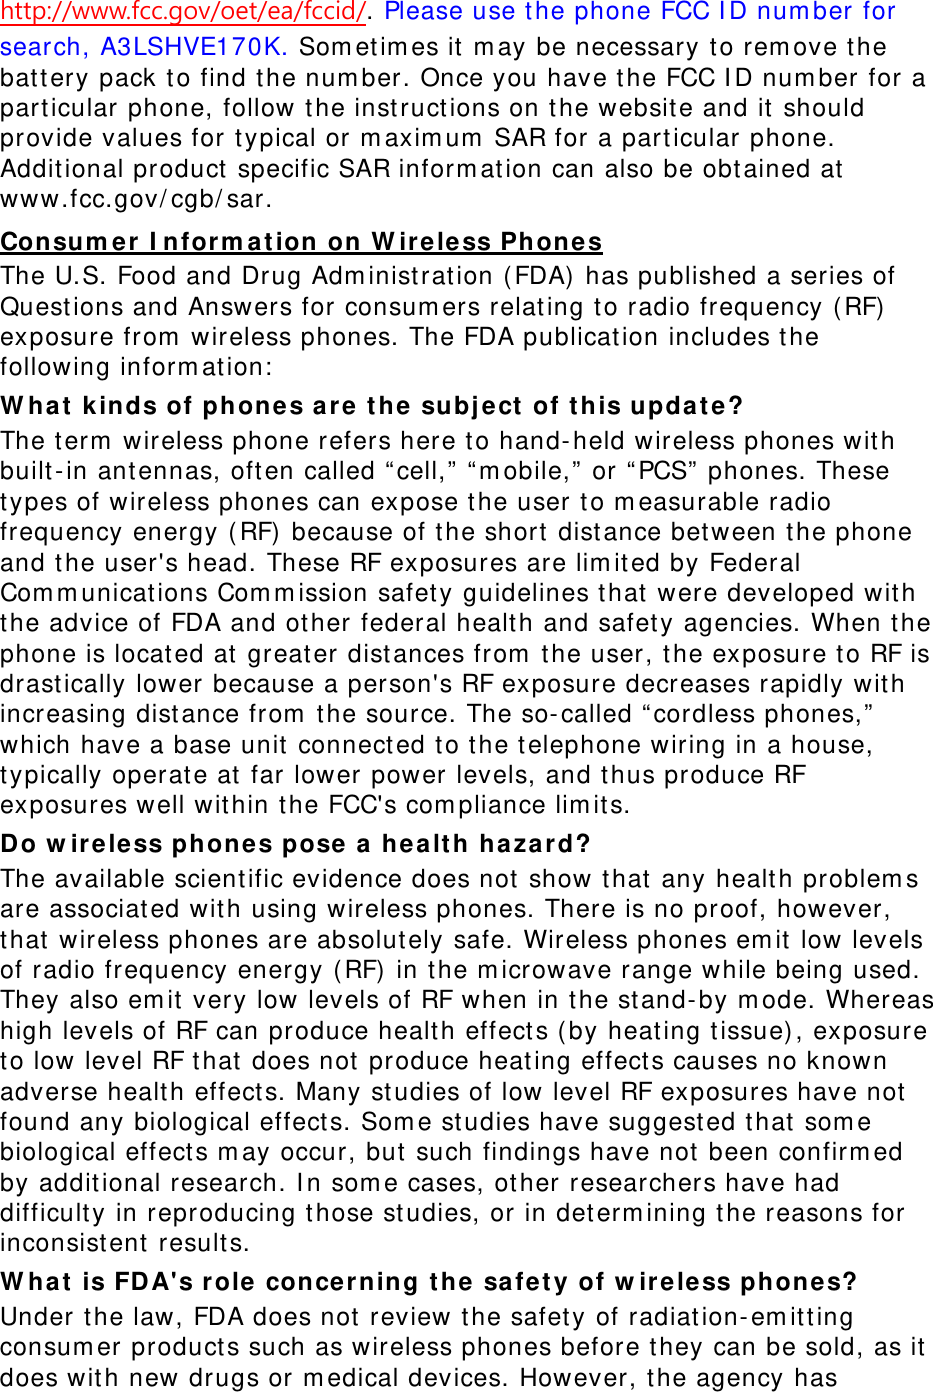 http://www.fcc.gov/oet/ea/fccid/. Please use the phone FCC ID number for search, A3LSHVE170K. Sometimes it may be necessary to remove the battery pack to find the number. Once you have the FCC ID number for a particular phone, follow the instructions on the website and it should provide values for typical or maximum SAR for a particular phone. Additional product specific SAR information can also be obtained at www.fcc.gov/cgb/sar. Consumer Information on Wireless Phones The U.S. Food and Drug Administration (FDA) has published a series of Questions and Answers for consumers relating to radio frequency (RF) exposure from wireless phones. The FDA publication includes the following information: What kinds of phones are the subject of this update? The term wireless phone refers here to hand-held wireless phones with built-in antennas, often called “cell,” “mobile,” or “PCS” phones. These types of wireless phones can expose the user to measurable radio frequency energy (RF) because of the short distance between the phone and the user&apos;s head. These RF exposures are limited by Federal Communications Commission safety guidelines that were developed with the advice of FDA and other federal health and safety agencies. When the phone is located at greater distances from the user, the exposure to RF is drastically lower because a person&apos;s RF exposure decreases rapidly with increasing distance from the source. The so-called “cordless phones,” which have a base unit connected to the telephone wiring in a house, typically operate at far lower power levels, and thus produce RF exposures well within the FCC&apos;s compliance limits. Do wireless phones pose a health hazard? The available scientific evidence does not show that any health problems are associated with using wireless phones. There is no proof, however, that wireless phones are absolutely safe. Wireless phones emit low levels of radio frequency energy (RF) in the microwave range while being used. They also emit very low levels of RF when in the stand-by mode. Whereas high levels of RF can produce health effects (by heating tissue), exposure to low level RF that does not produce heating effects causes no known adverse health effects. Many studies of low level RF exposures have not found any biological effects. Some studies have suggested that some biological effects may occur, but such findings have not been confirmed by additional research. In some cases, other researchers have had difficulty in reproducing those studies, or in determining the reasons for inconsistent results. What is FDA&apos;s role concerning the safety of wireless phones? Under the law, FDA does not review the safety of radiation-emitting consumer products such as wireless phones before they can be sold, as it does with new drugs or medical devices. However, the agency has 